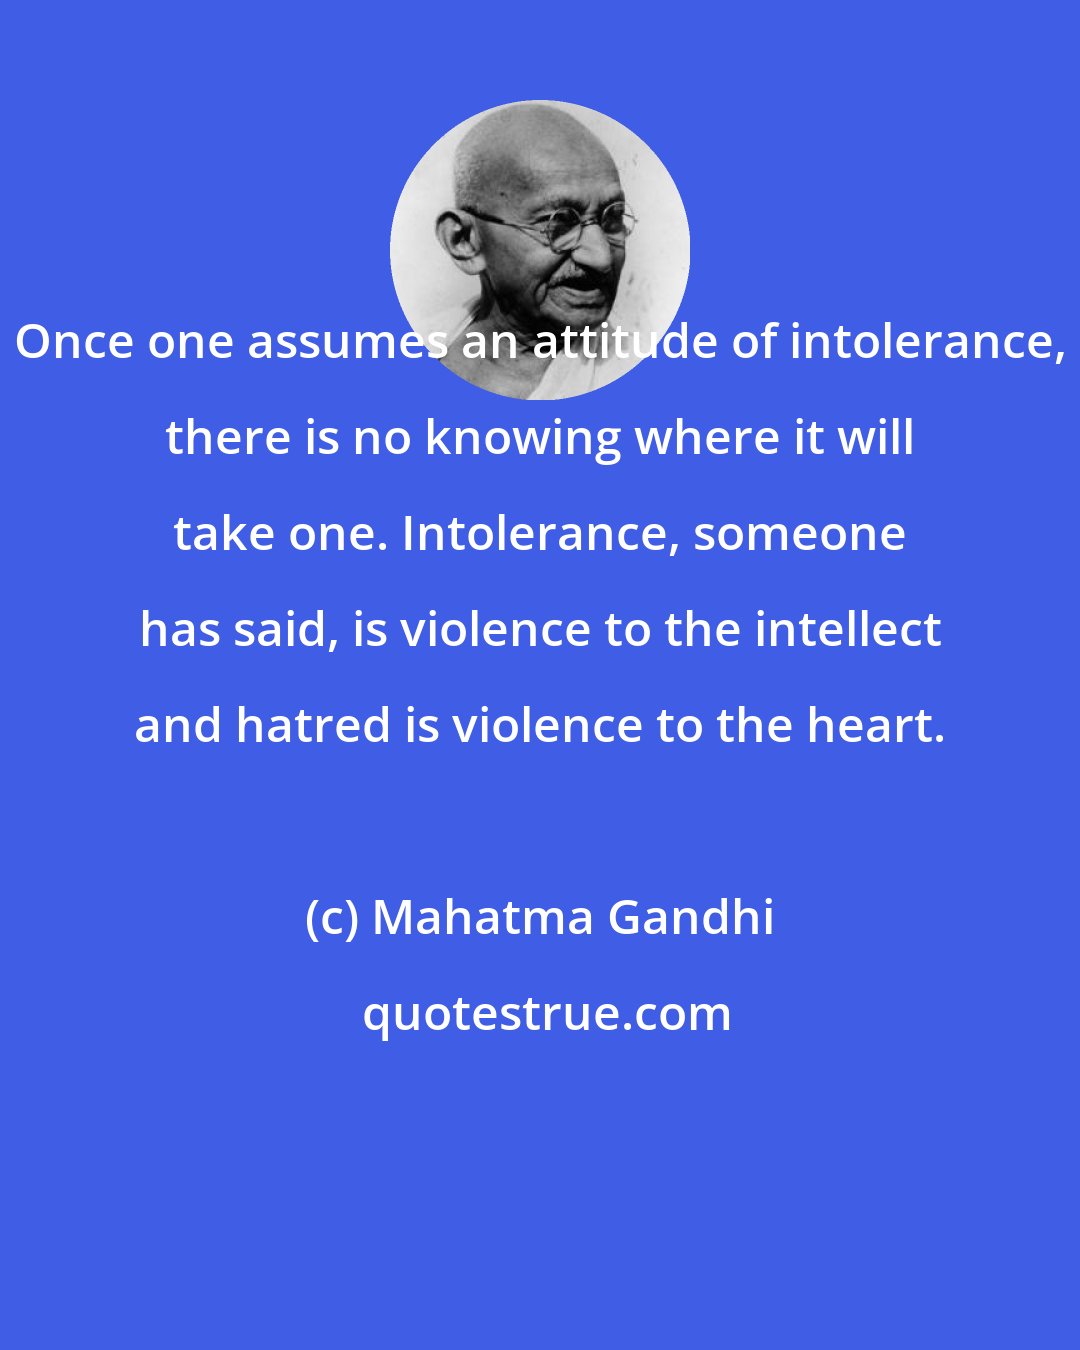 Mahatma Gandhi: Once one assumes an attitude of intolerance, there is no knowing where it will take one. Intolerance, someone has said, is violence to the intellect and hatred is violence to the heart.